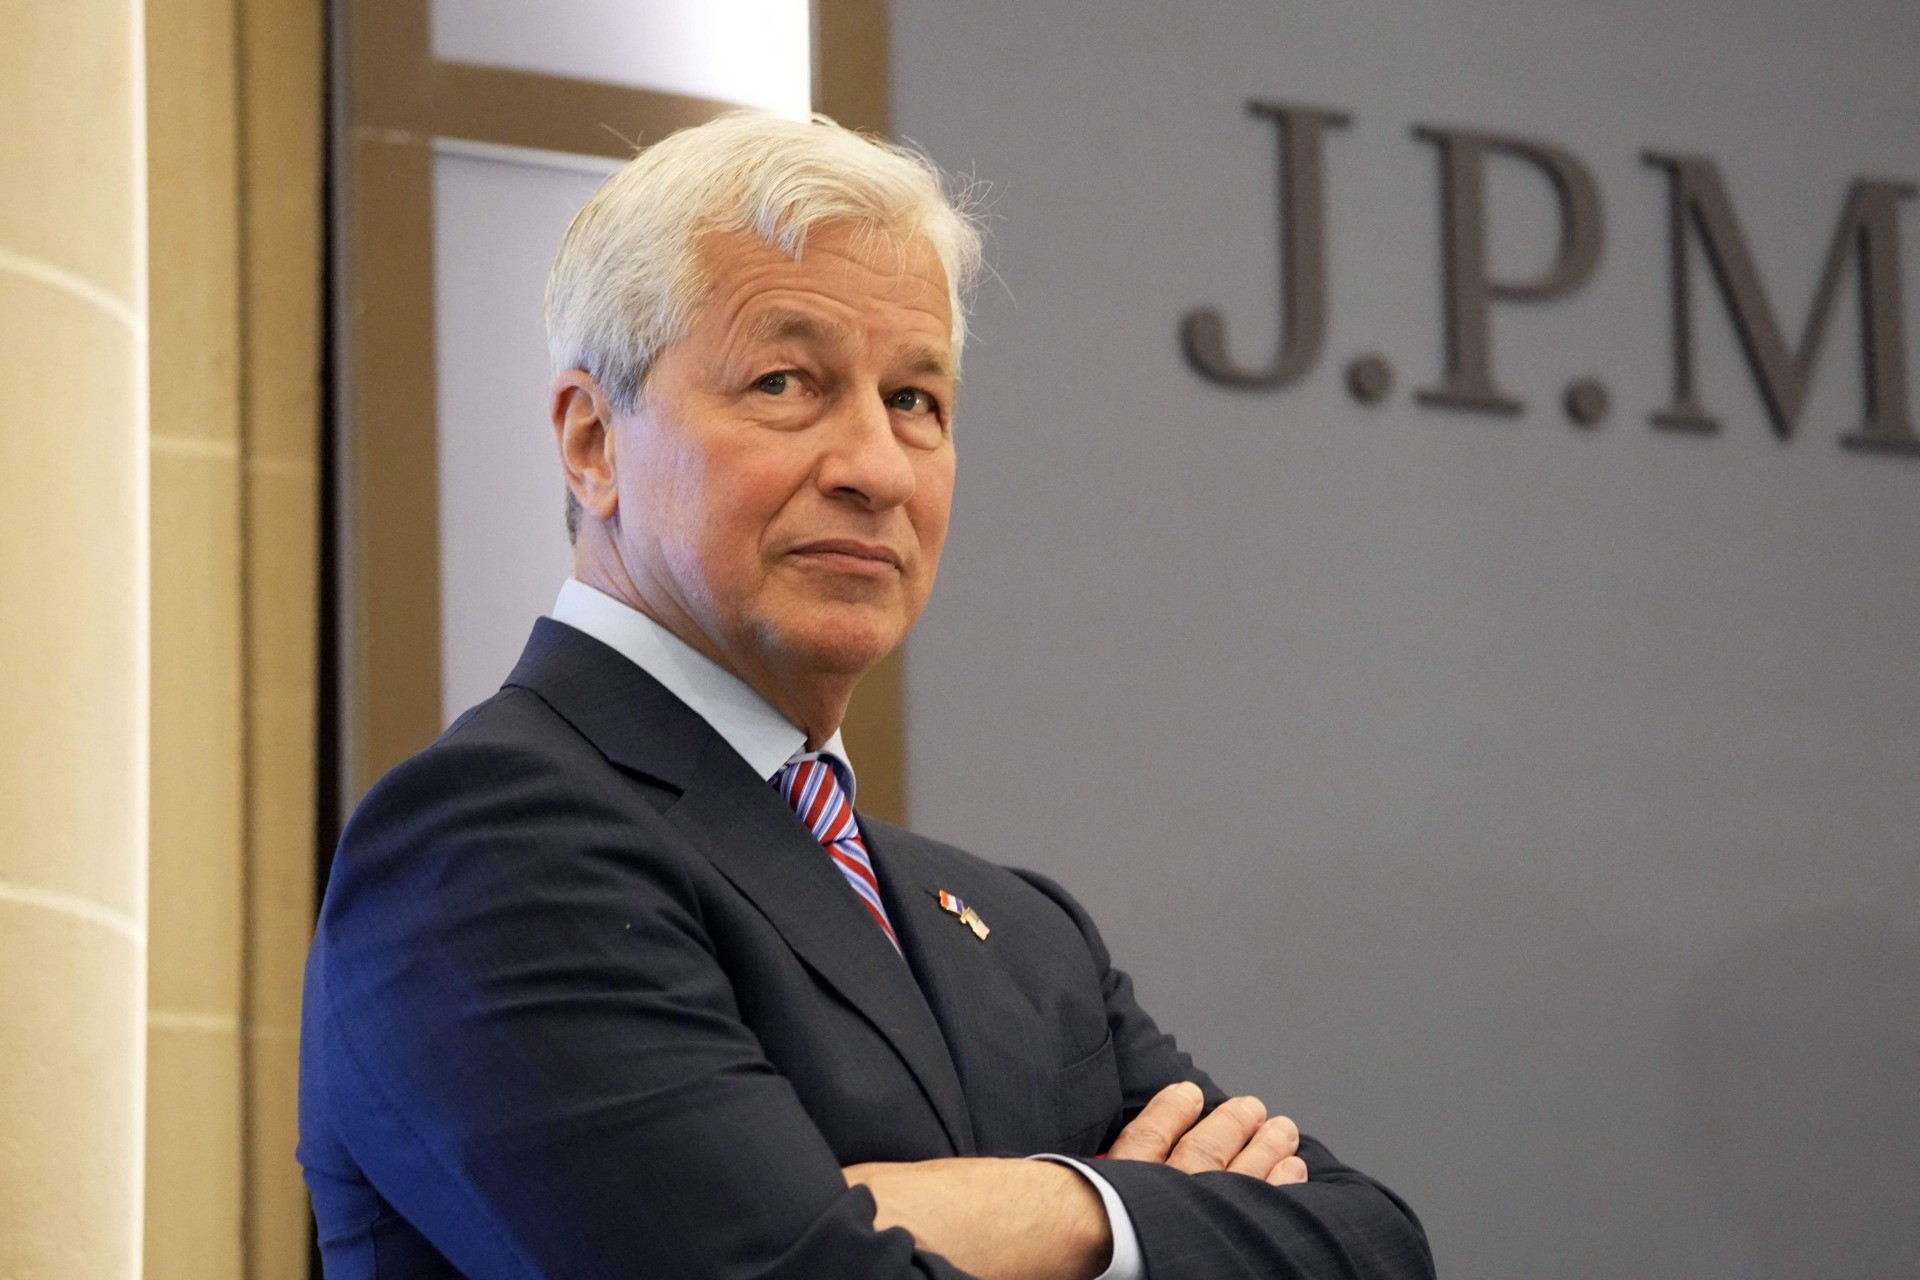 JP Morgan CEO Jamie Dimon looks on during the inauguration of the new French headquarters of US' JP Morgan bank on June 29, 2021 in Paris. - American bank JP Morgan's new trading floor is the latest example of how Brexit is changing Europe's financial landscape since January. (Photo by Michel Euler / POOL / AFP) (Photo by MICHEL EULER/POOL/AFP via Getty Images)